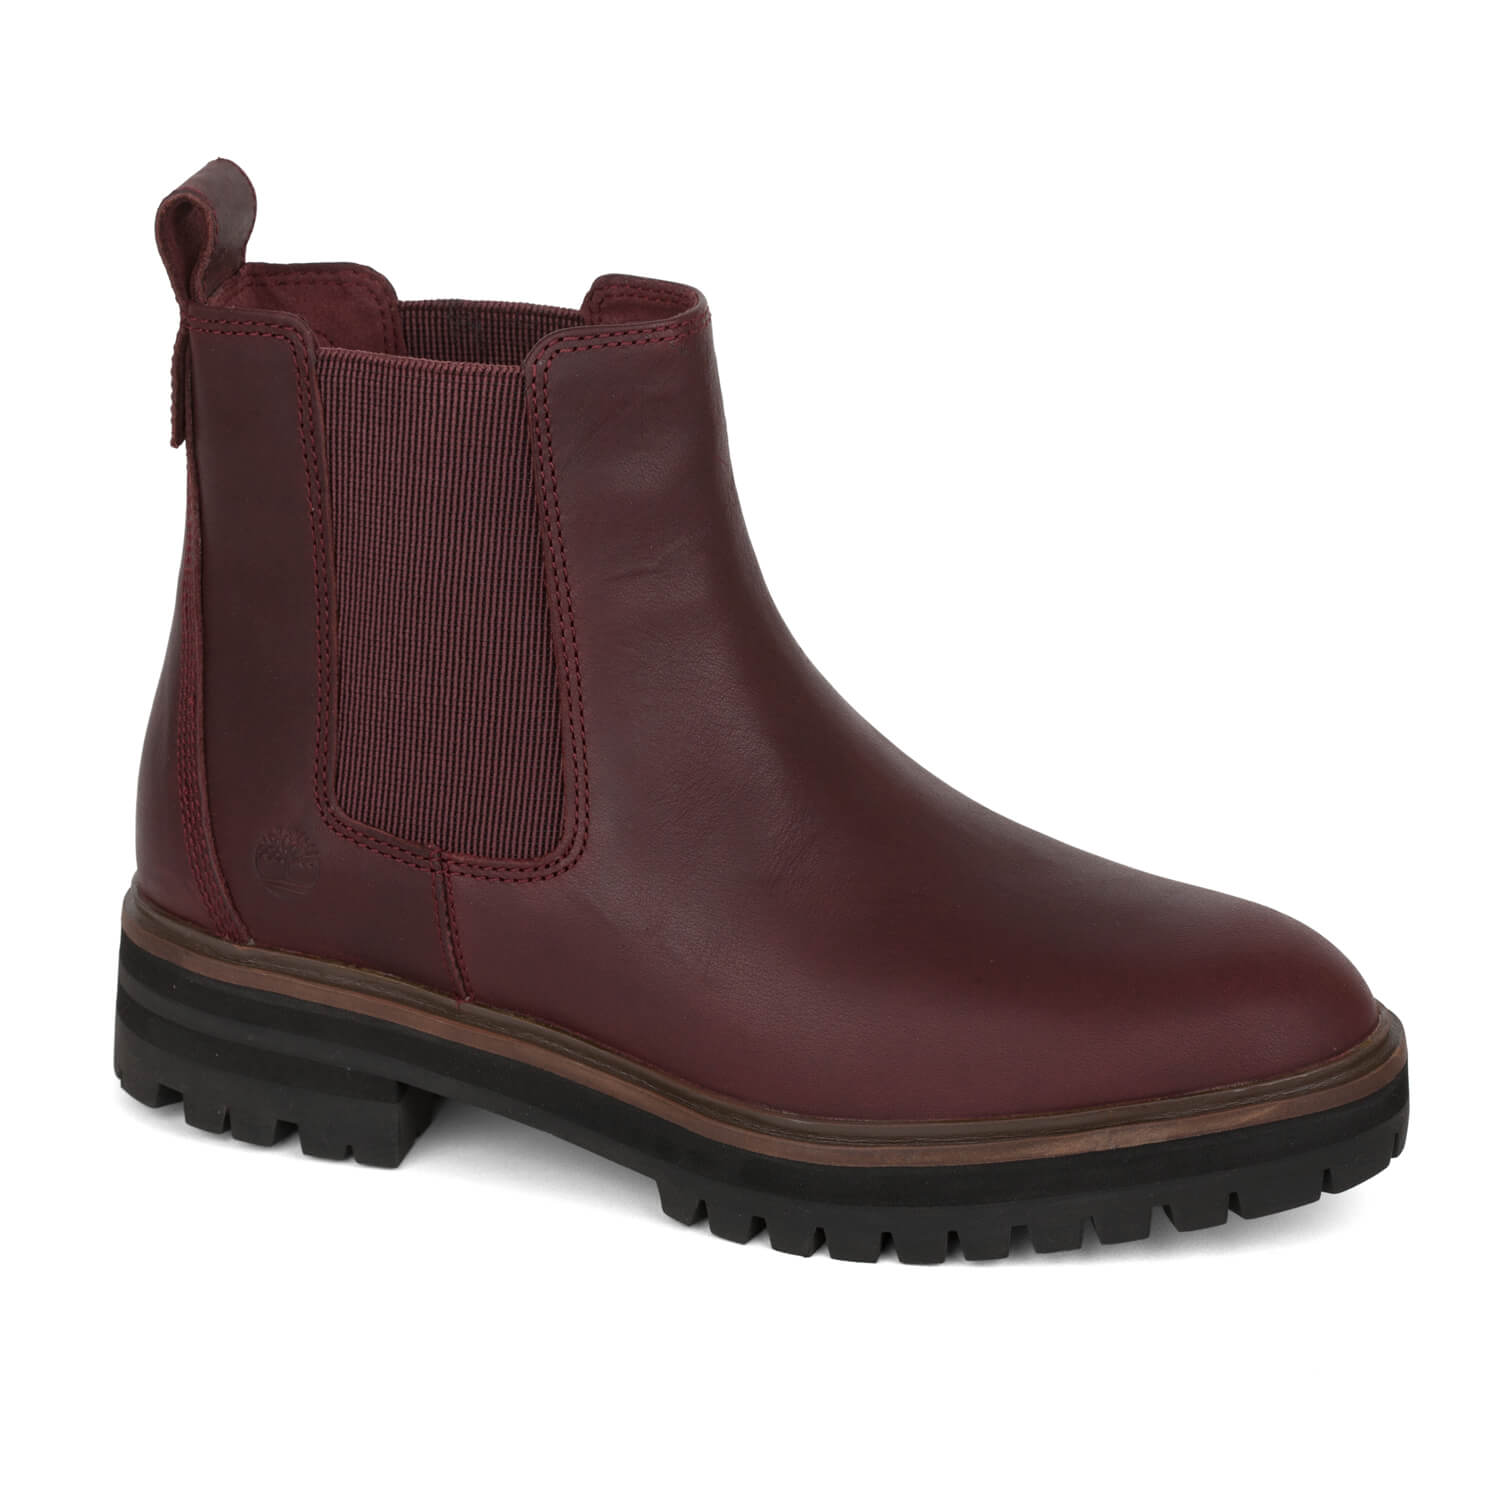 Timberland London Square Chelsea Boots weinrot Sohle |